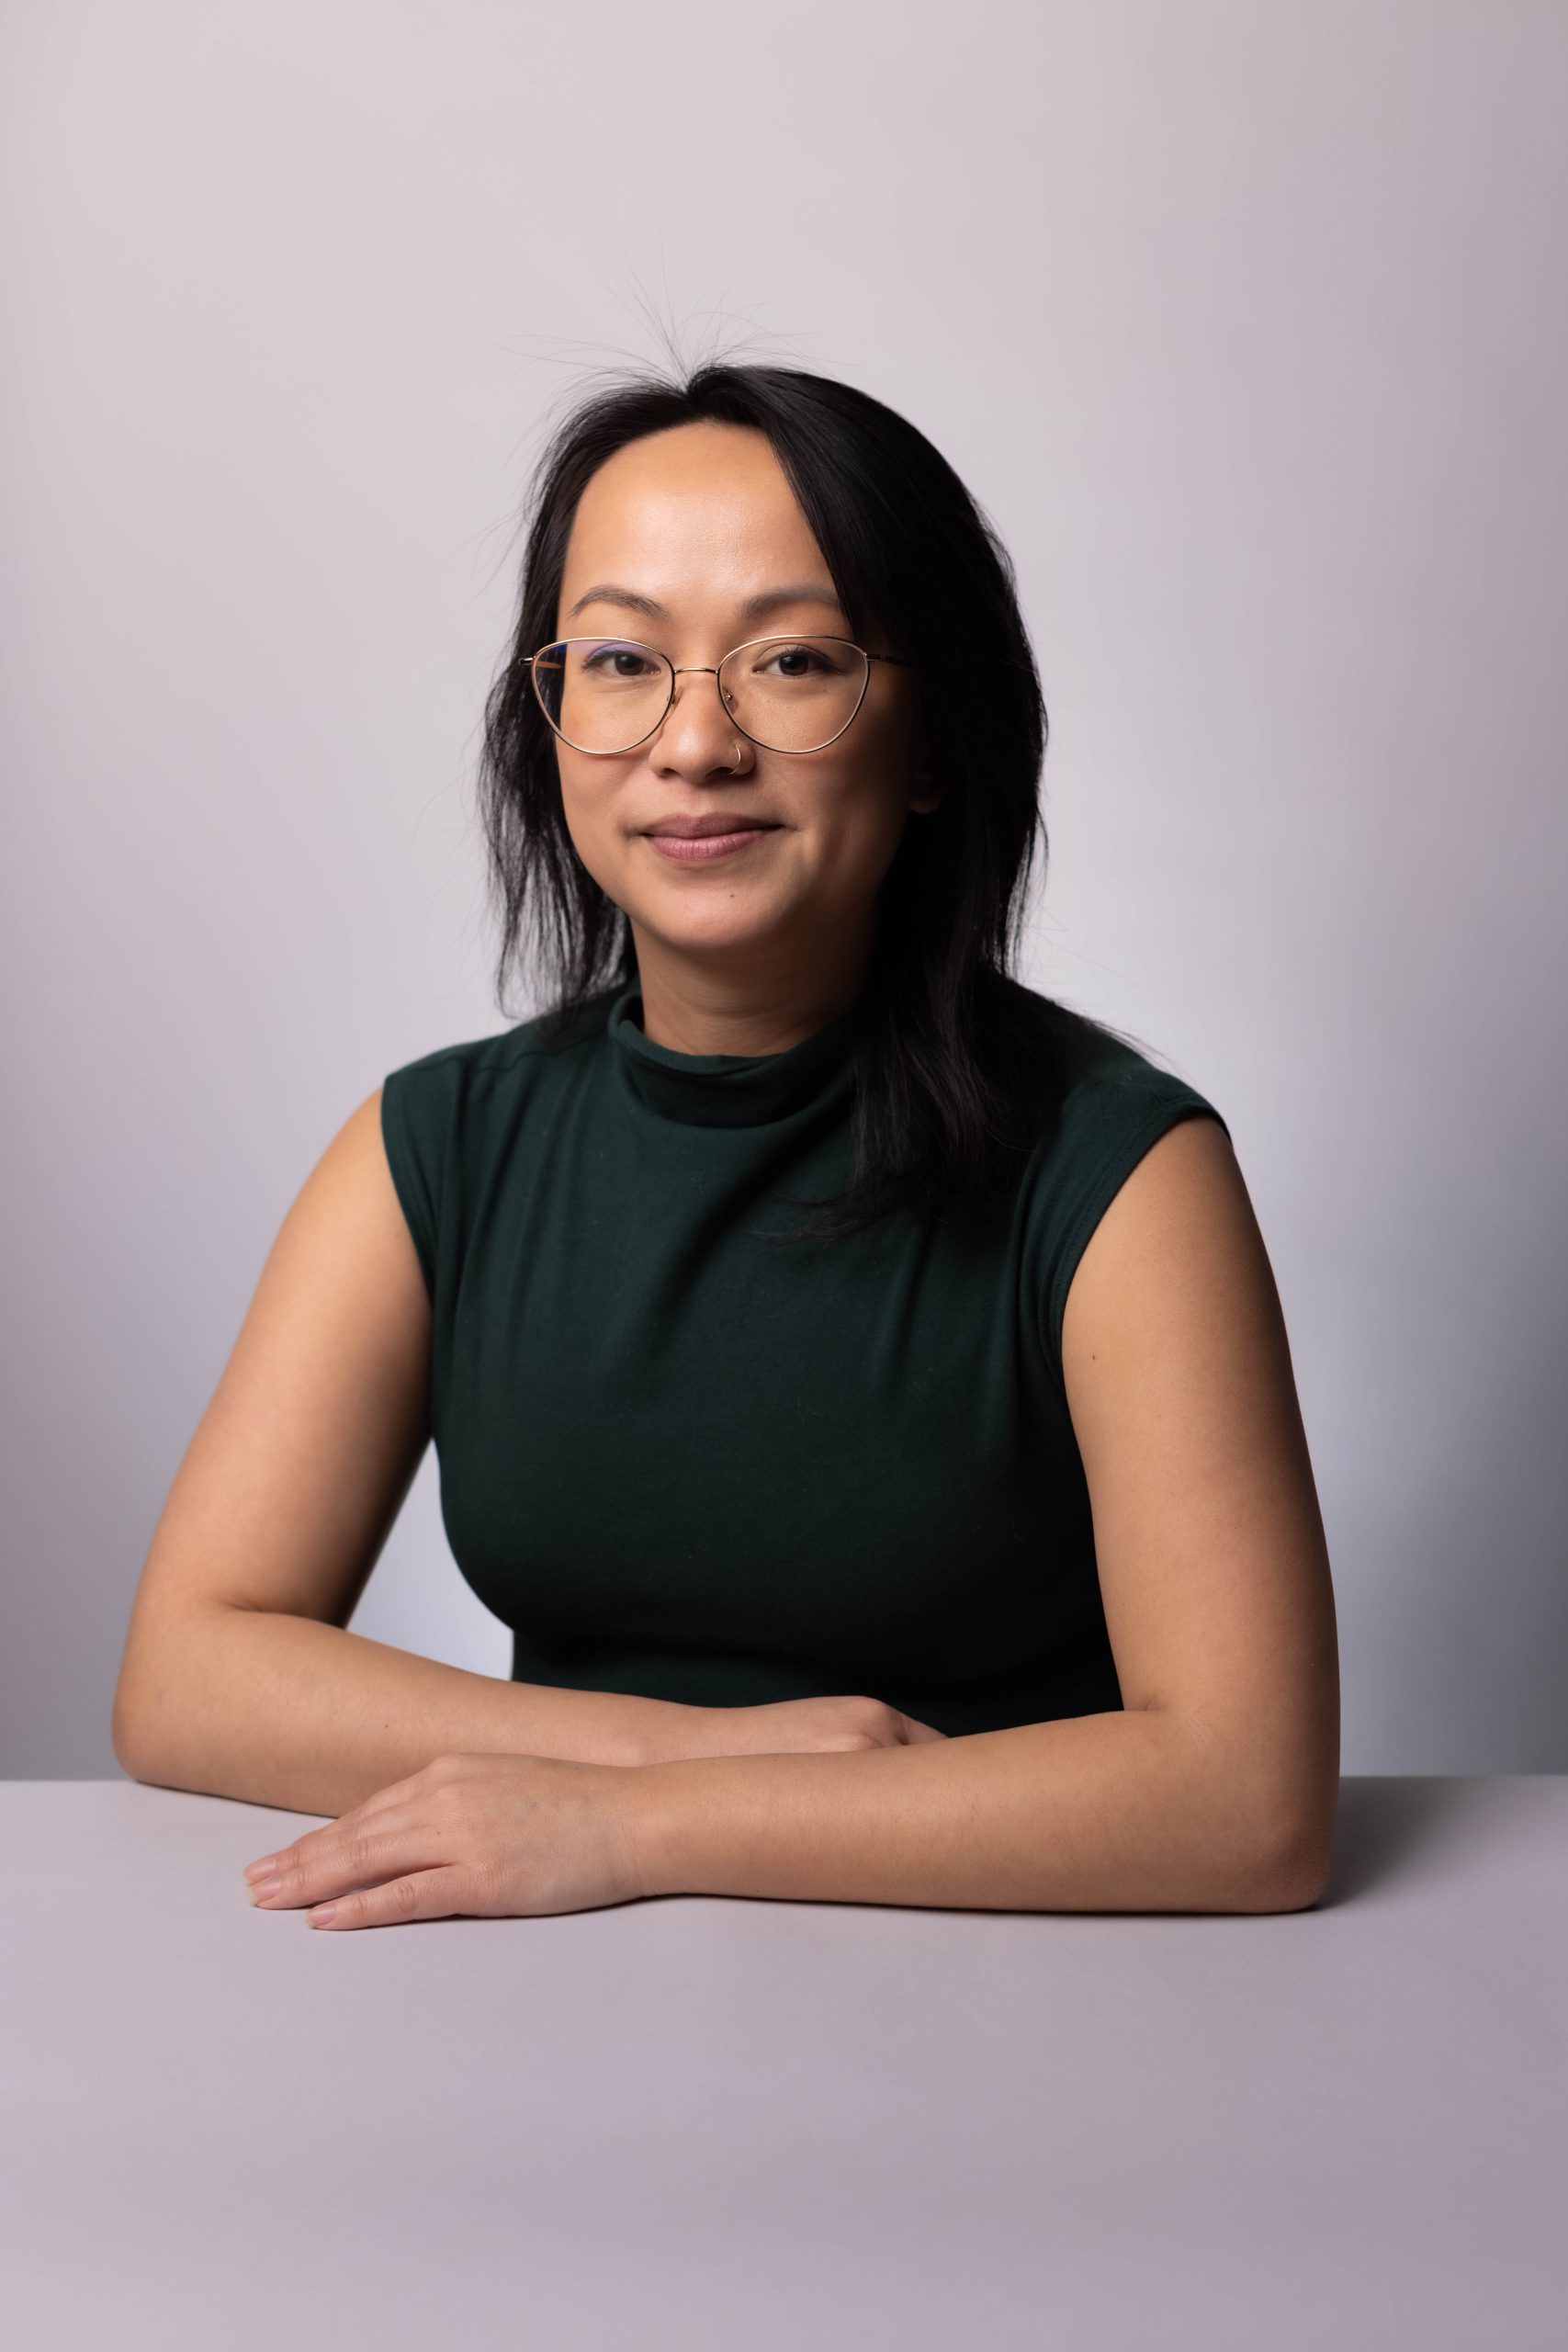 Tina Luu (she/her), founder, Fable